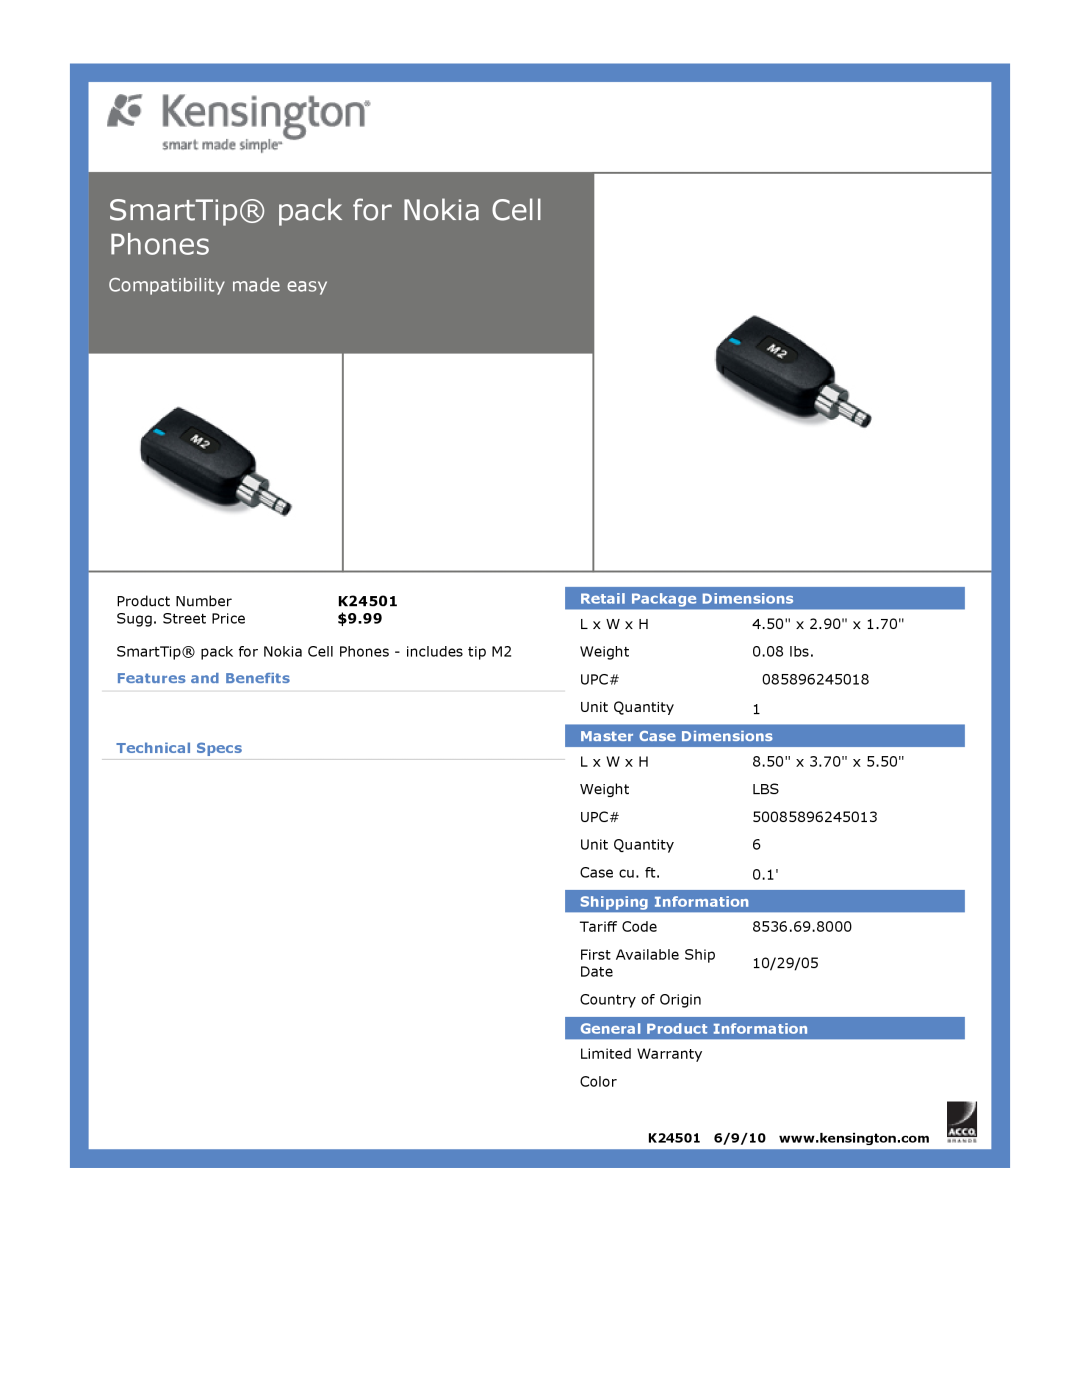 Kensington EU64325 SmartTip pack for Nokia Cell Phones, Compatibility made easy, $9.99, Retail Package Dimensions 